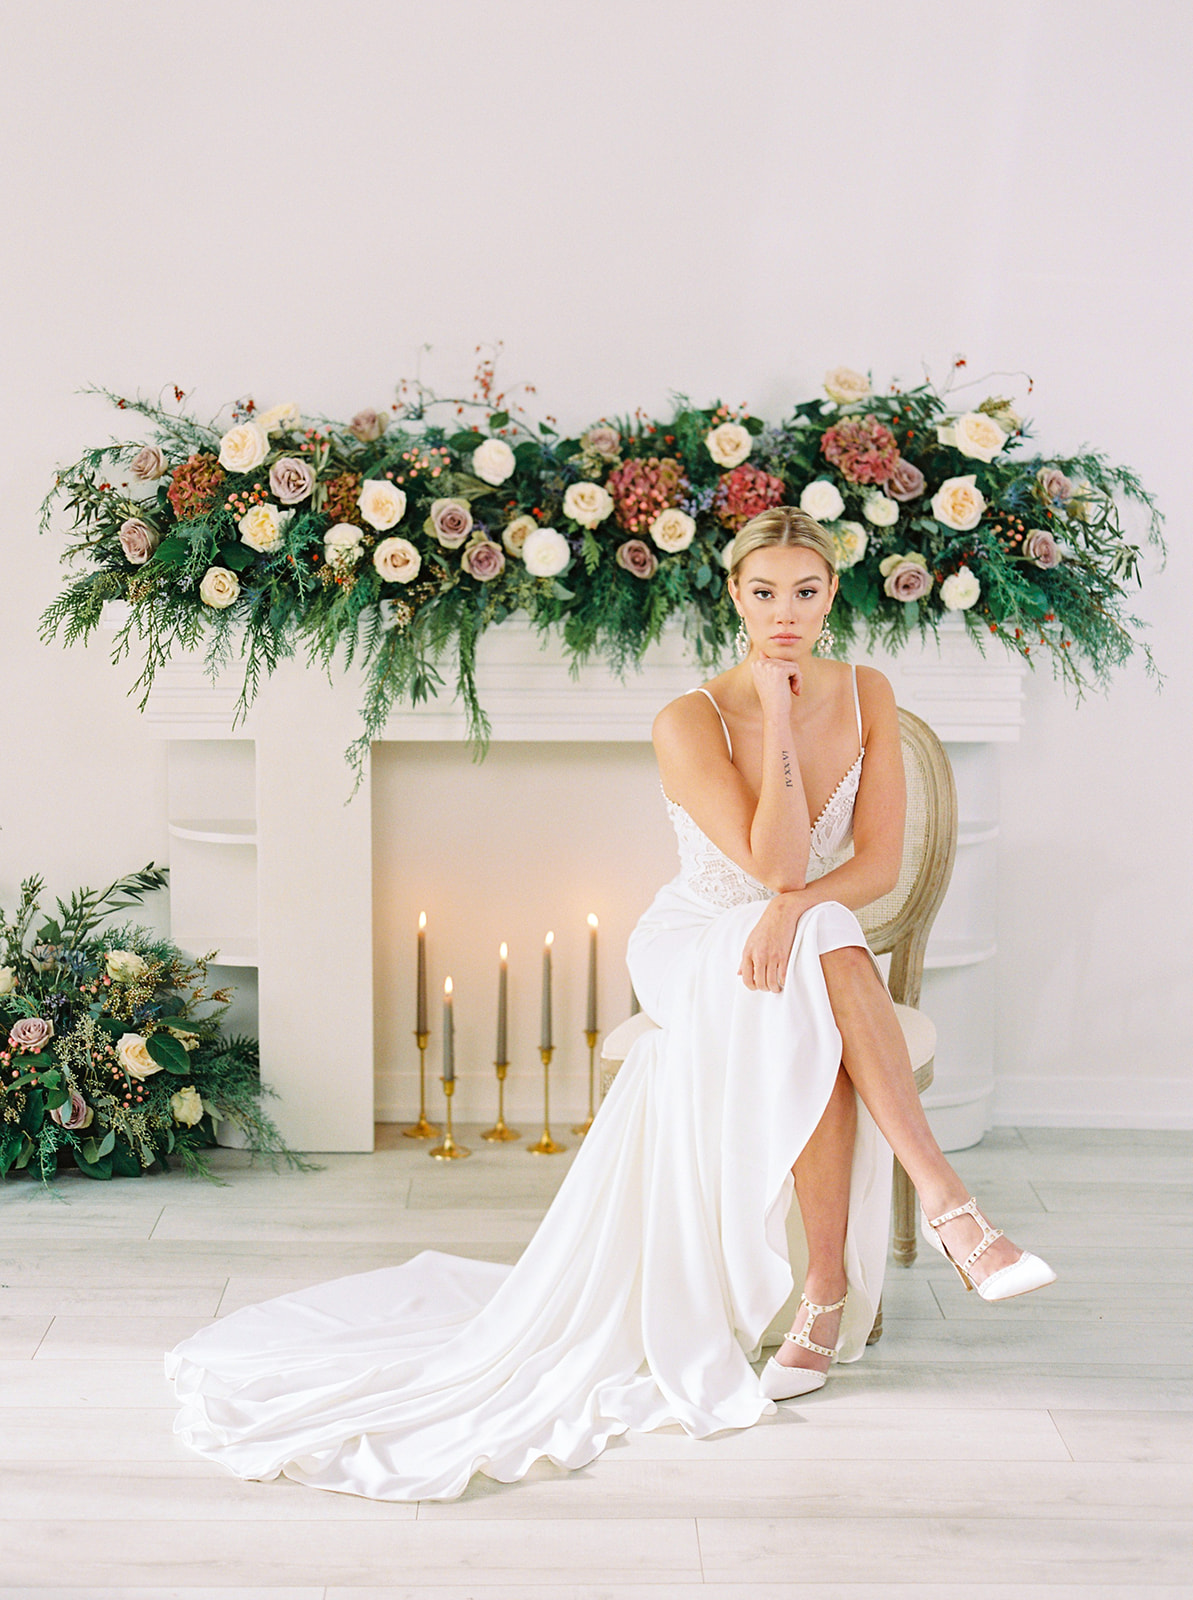 Bridal trends and styles for the 2022 wedding season